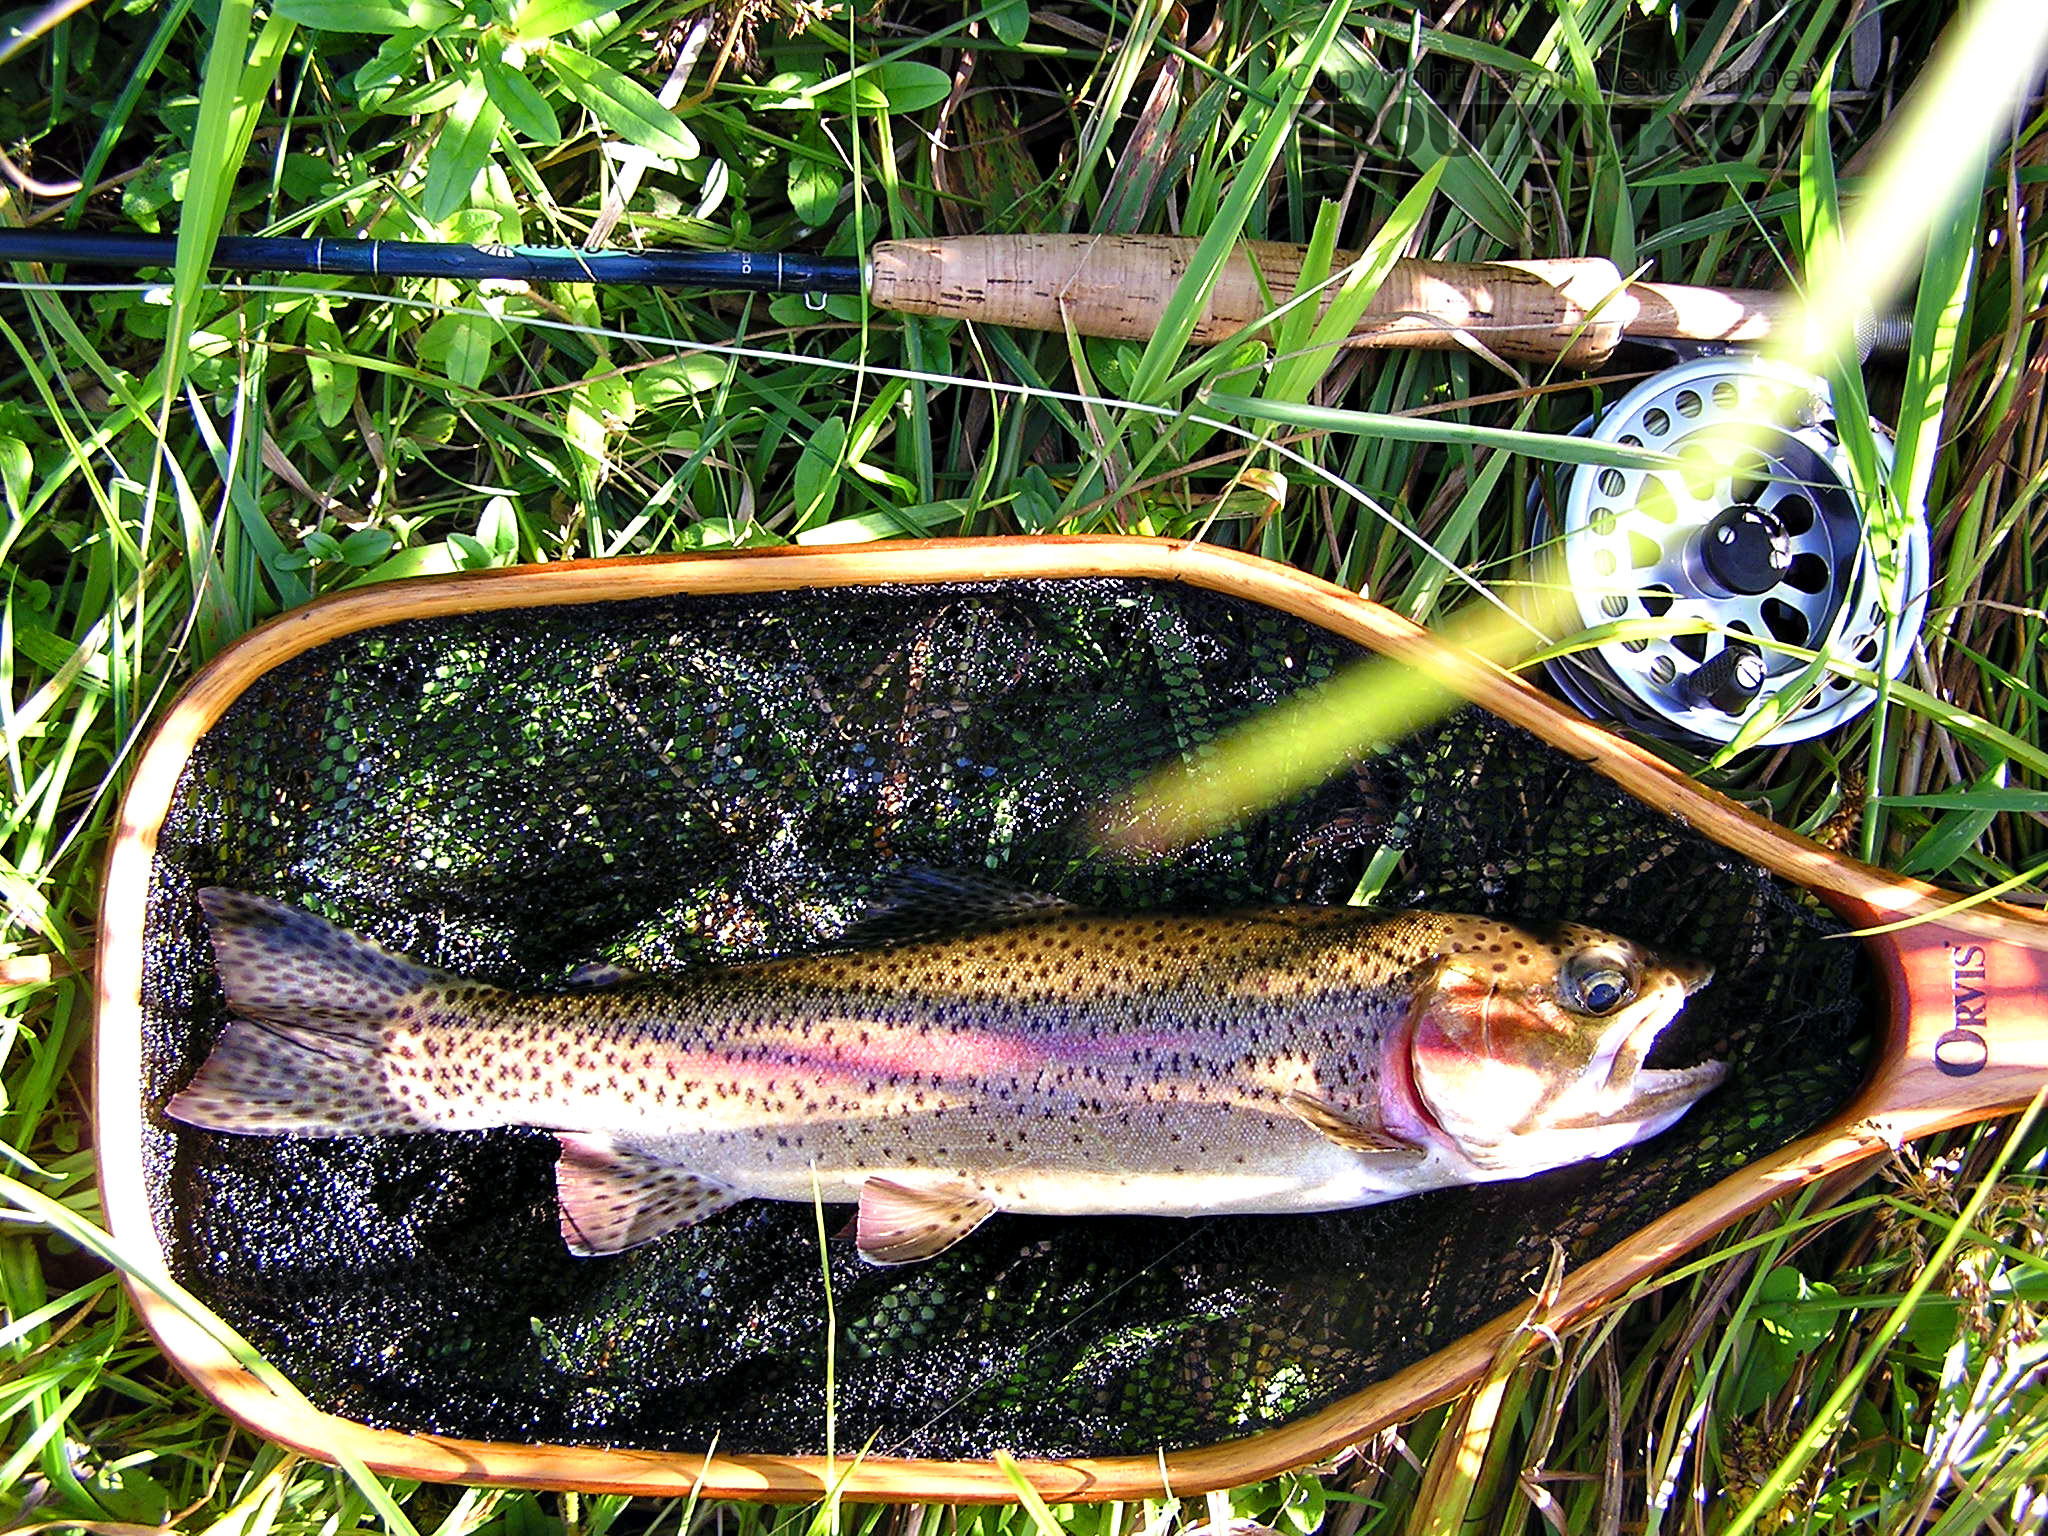 This 15-inch rainbow looks a little strange. From the Bois Brule River in Wisconsin.